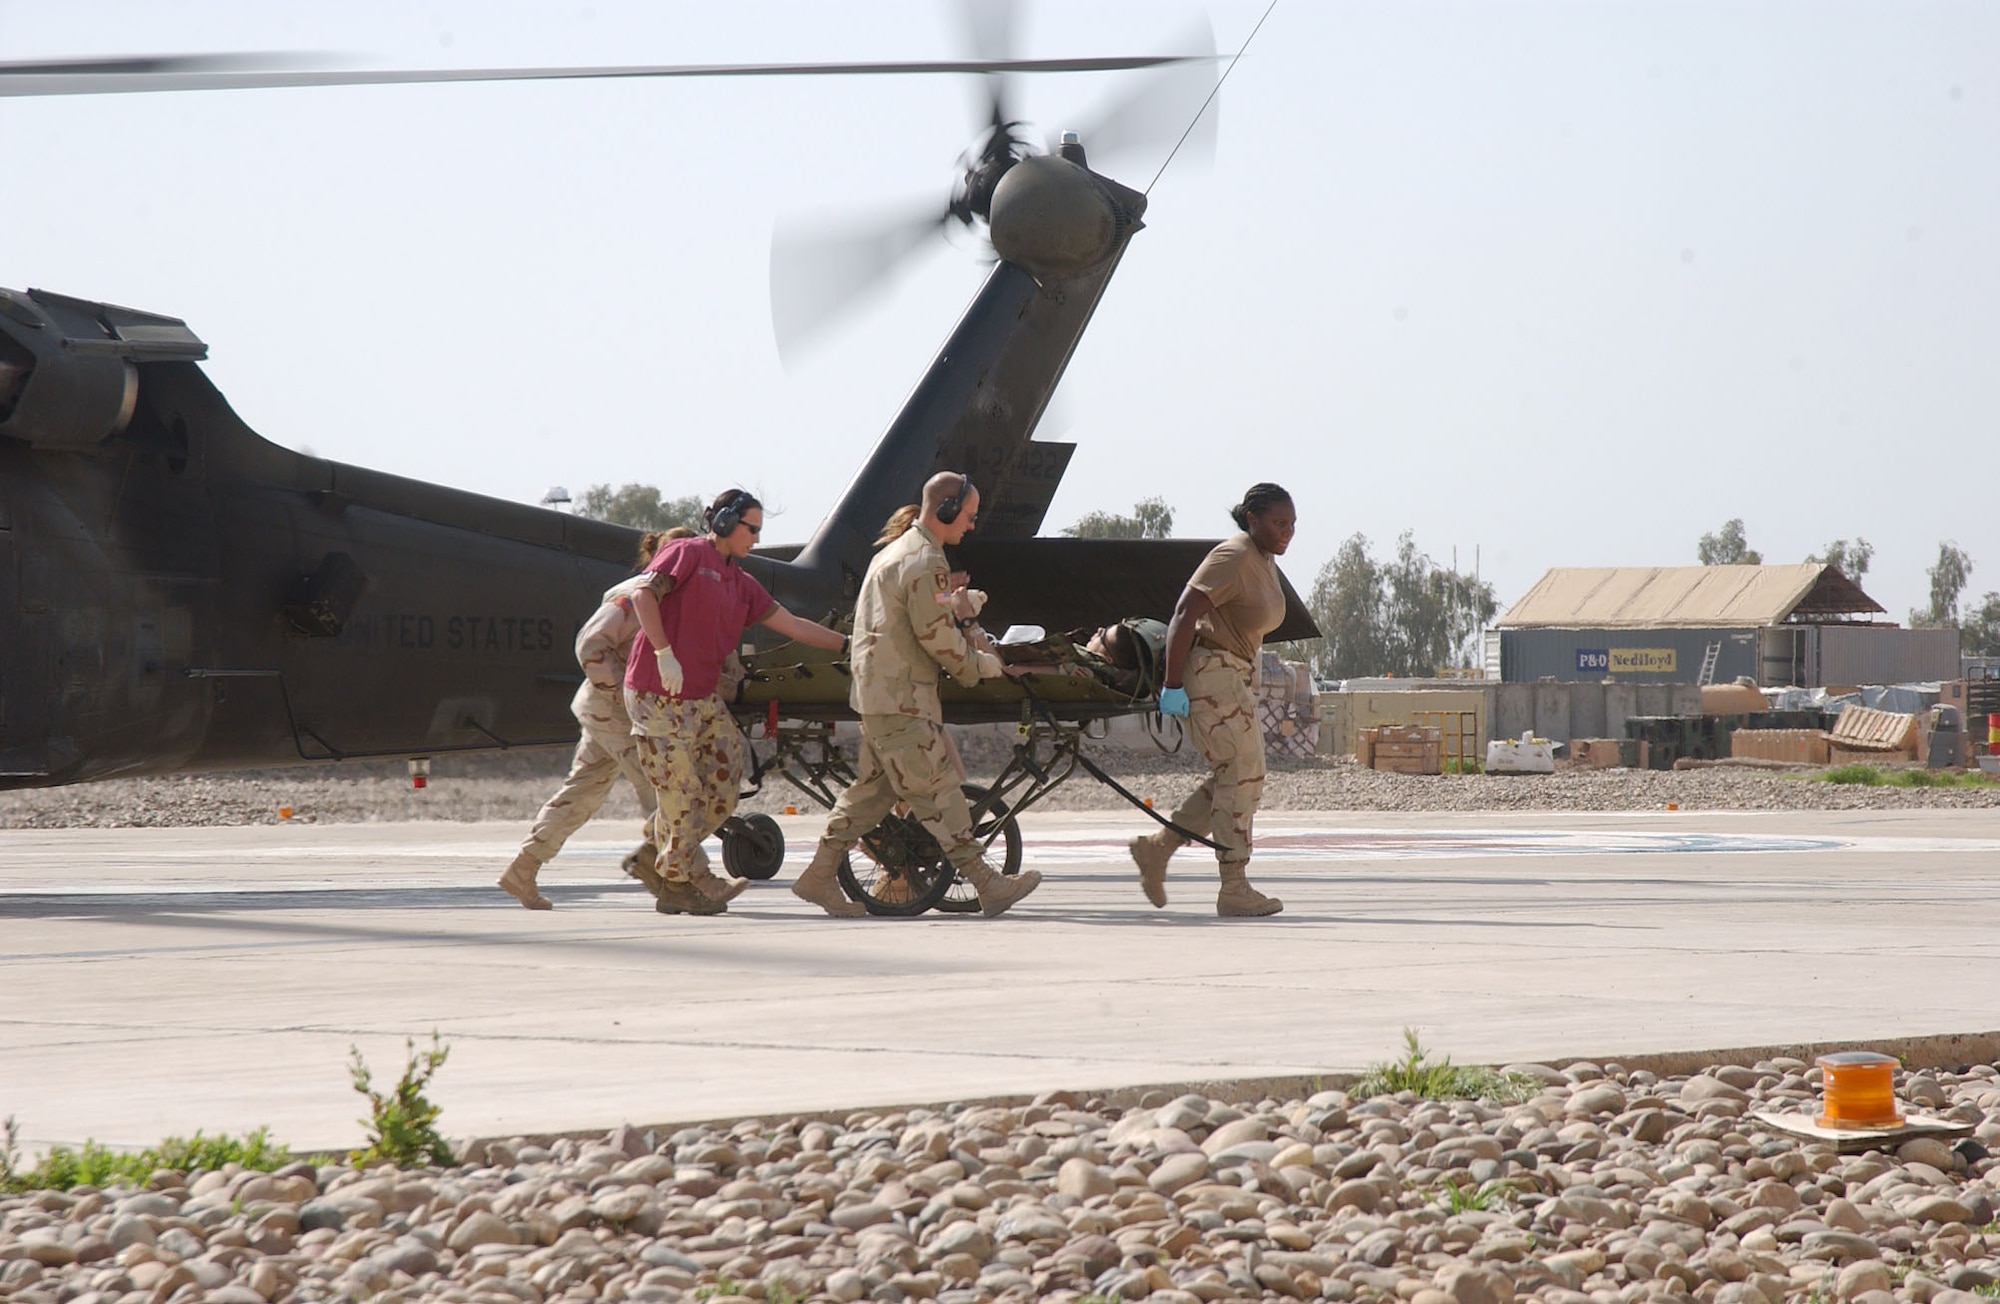 BALAD AIR BASE, Iraq -- A medical evacuation team moves a wounded Soldier to the emergency room at the Air Force theater hospital here.  Airmen of the 332nd Expeditionary Medical Group run the hospital that serves as a primary care clinic and a contingency aero medical staging facility used to provide medical services for U.S. and coalition forces.